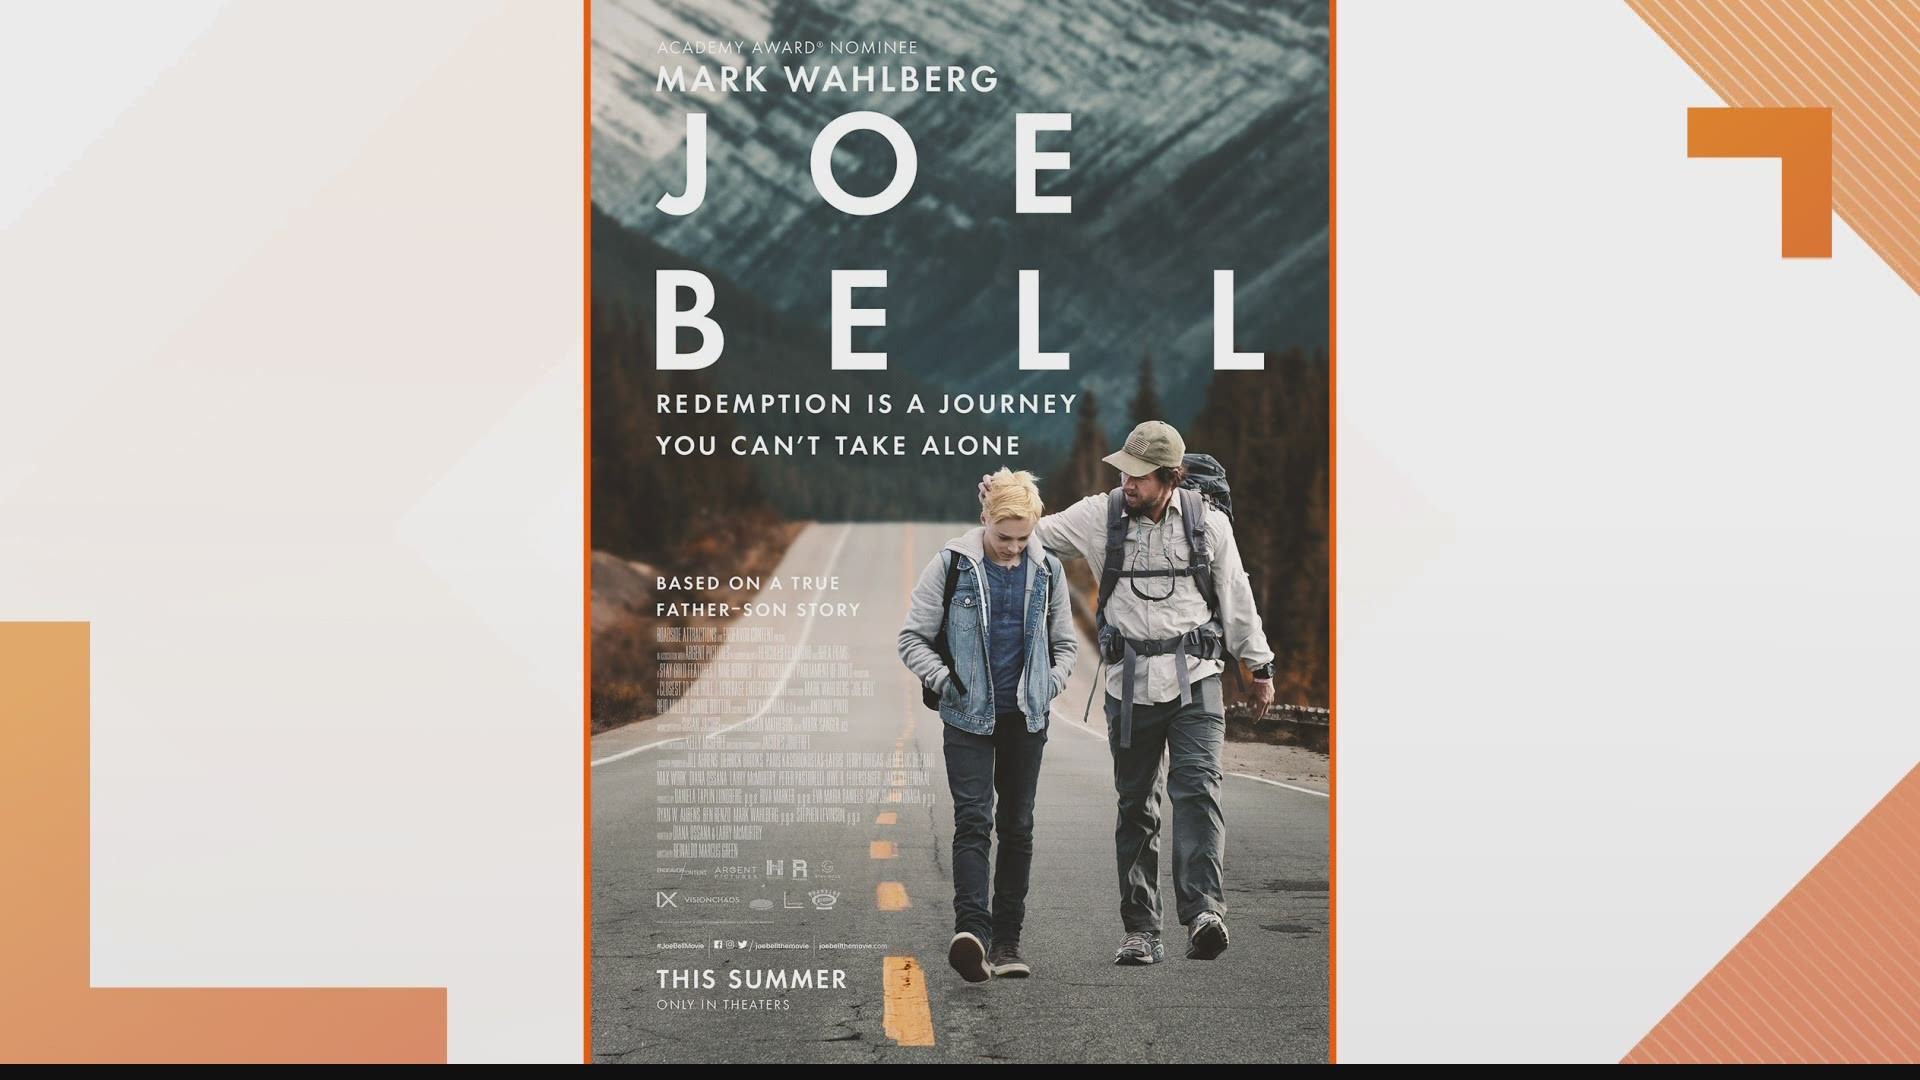 Wahlberg's latest movie Joe Bell is based on a true story about a dad who walked cross country to spread the message about his son's young life taken too soon.